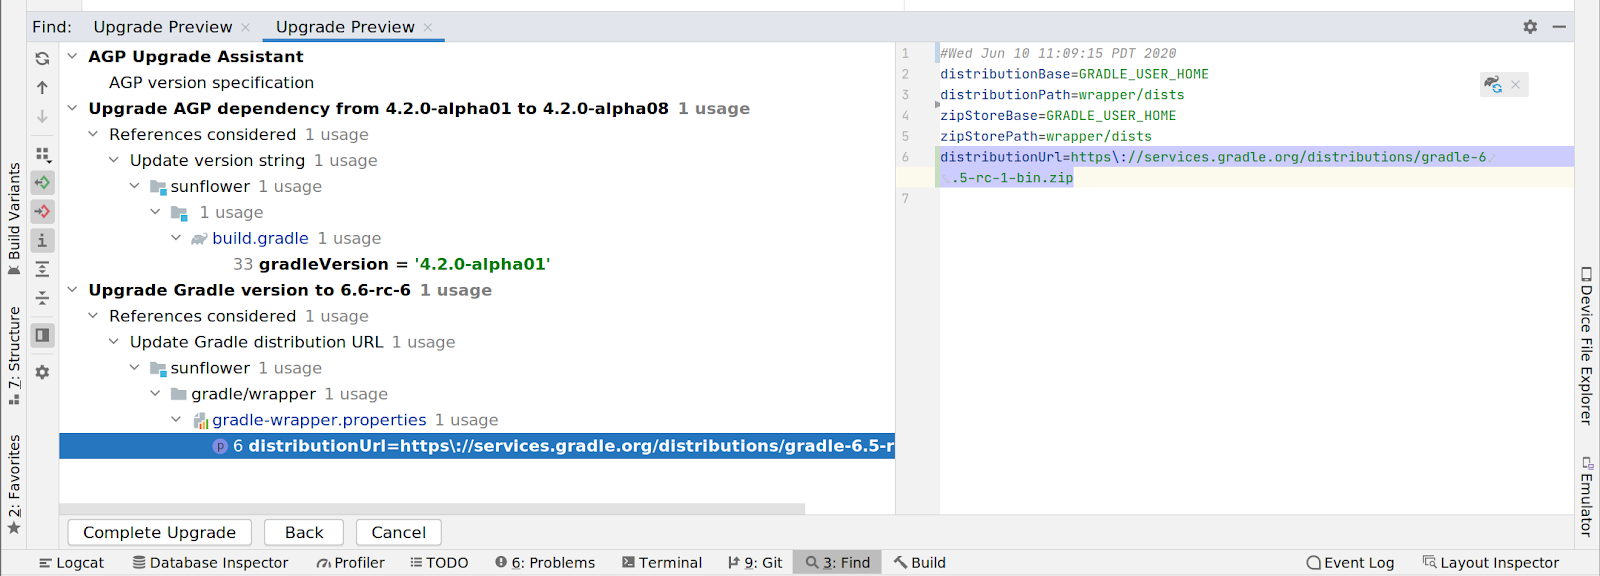 android studio for android ____ for mac